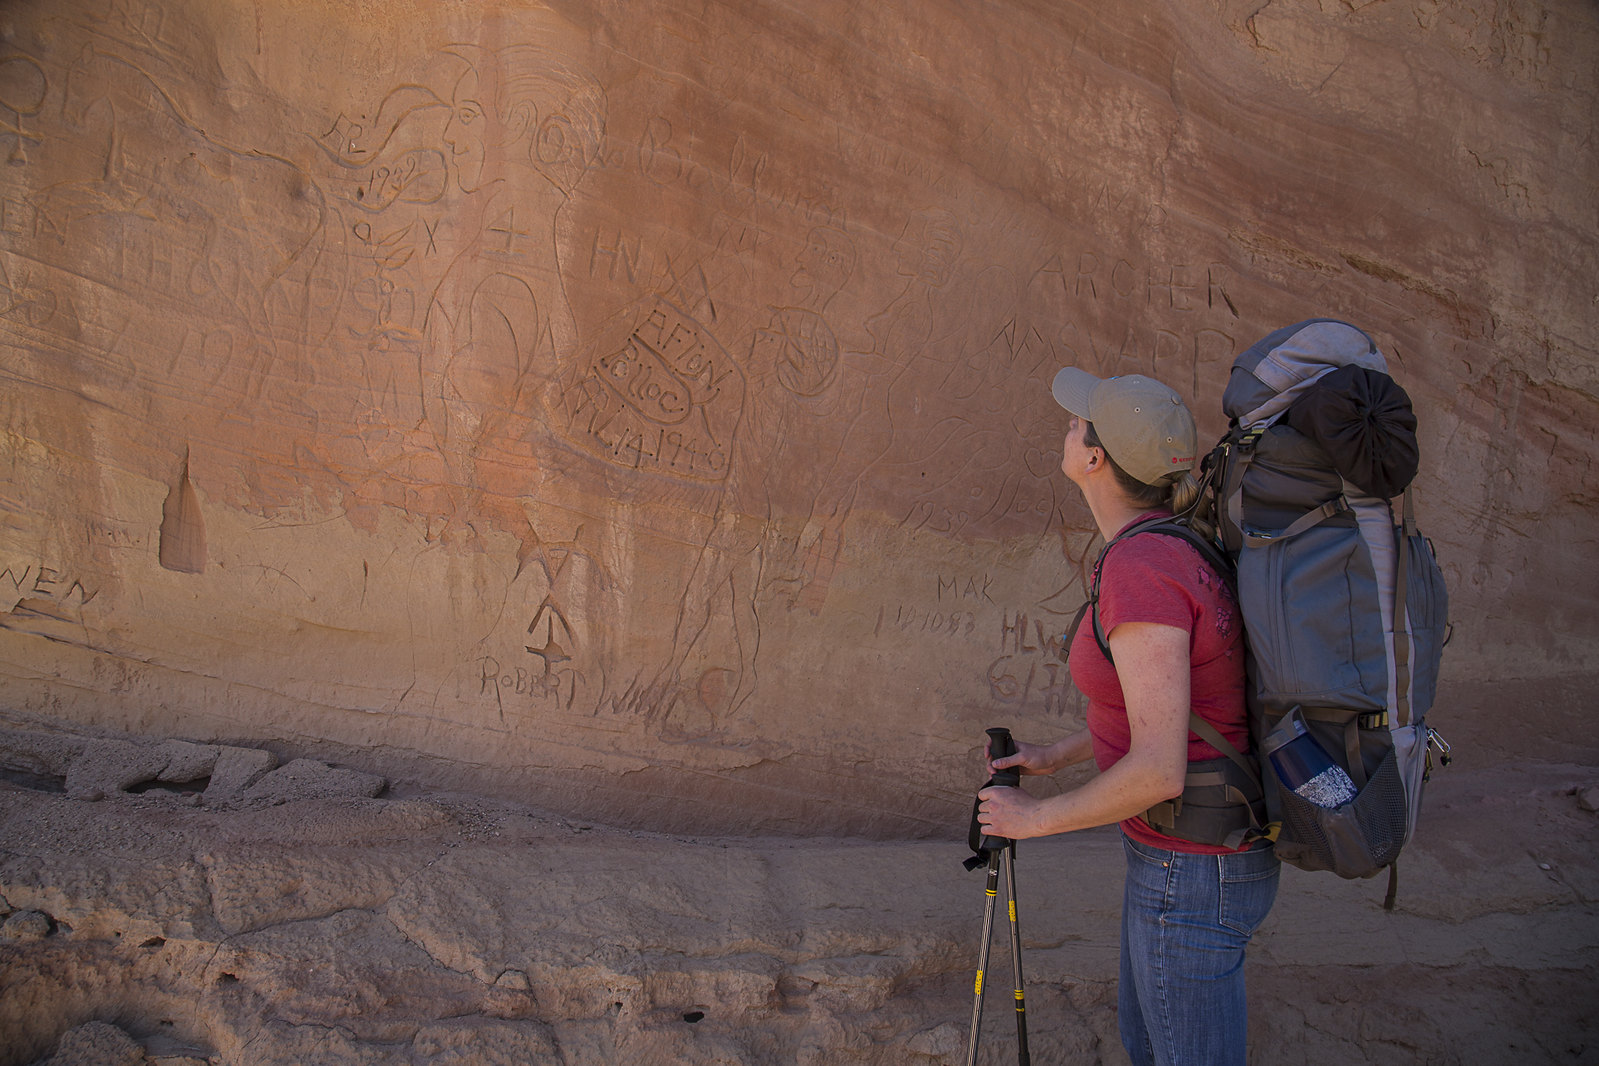 A person looks at etchings at Vermilion Cliffs National Monument